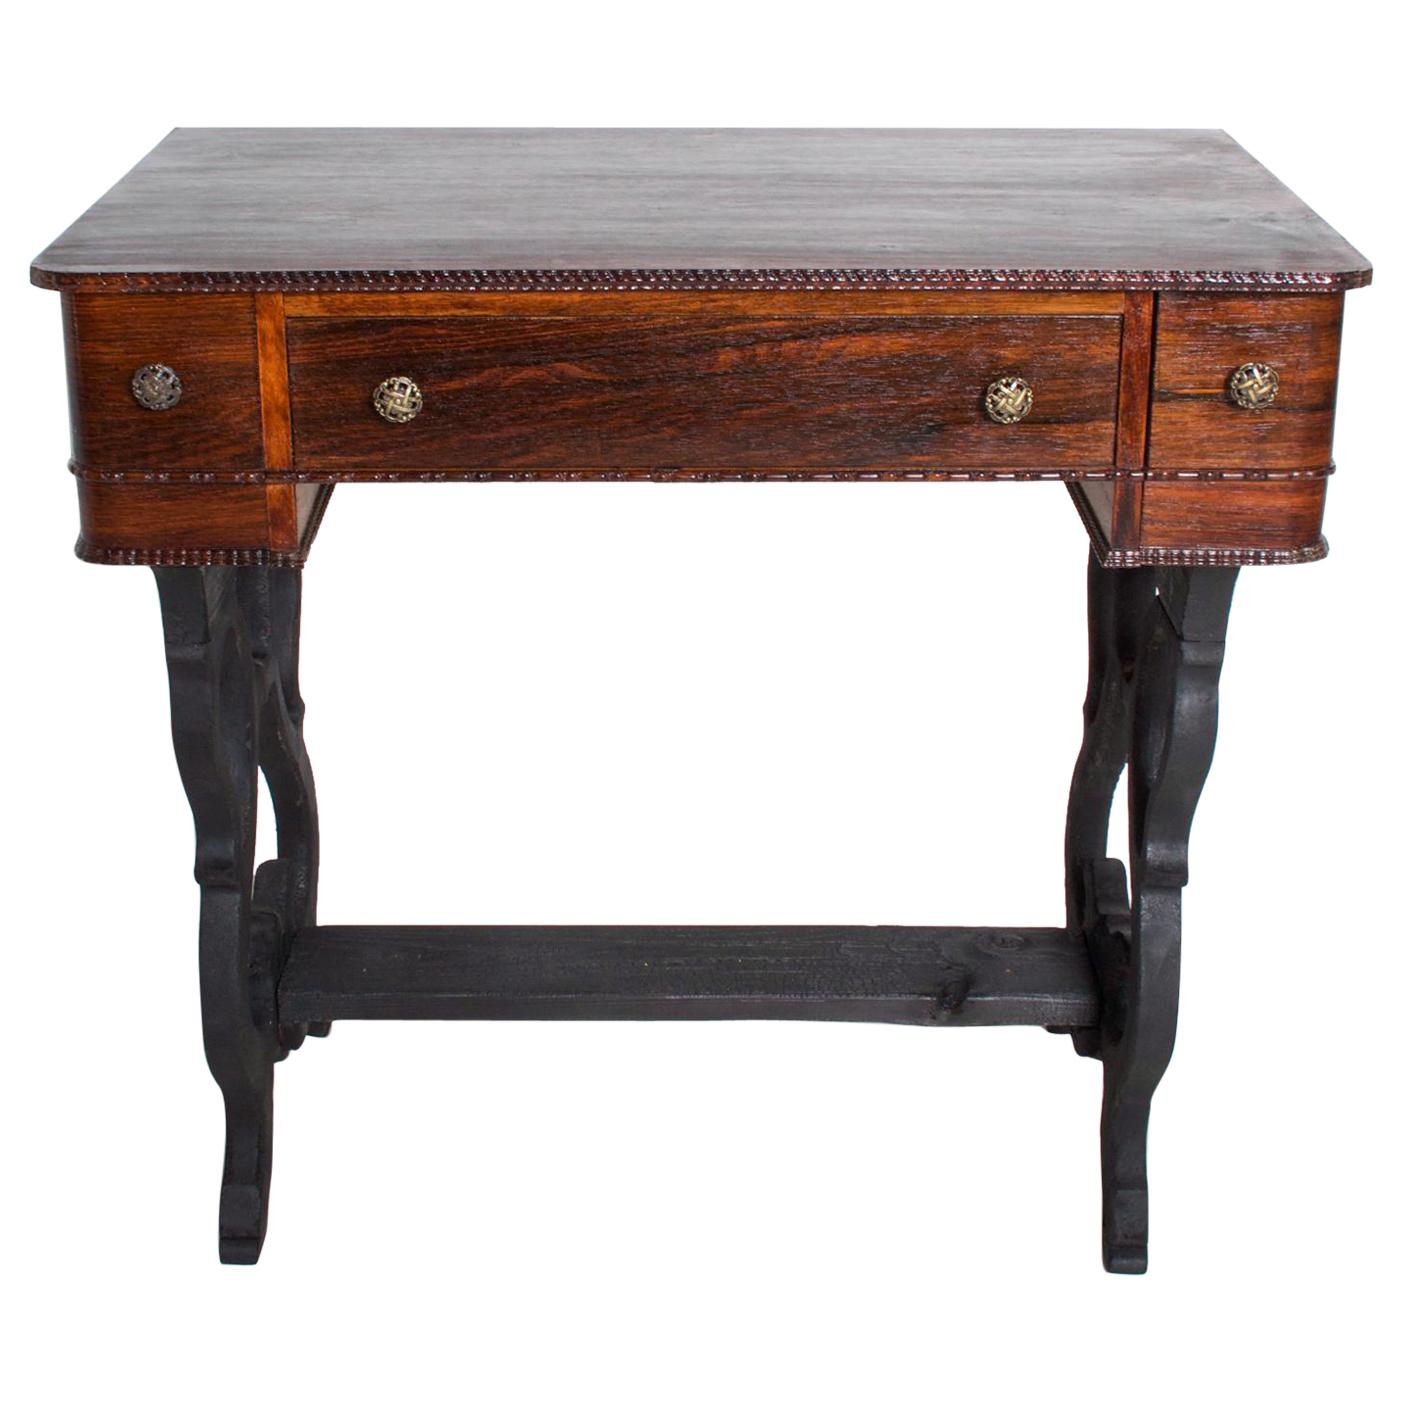 Antique Rosewood Work Table with Drawers Art Deco Period